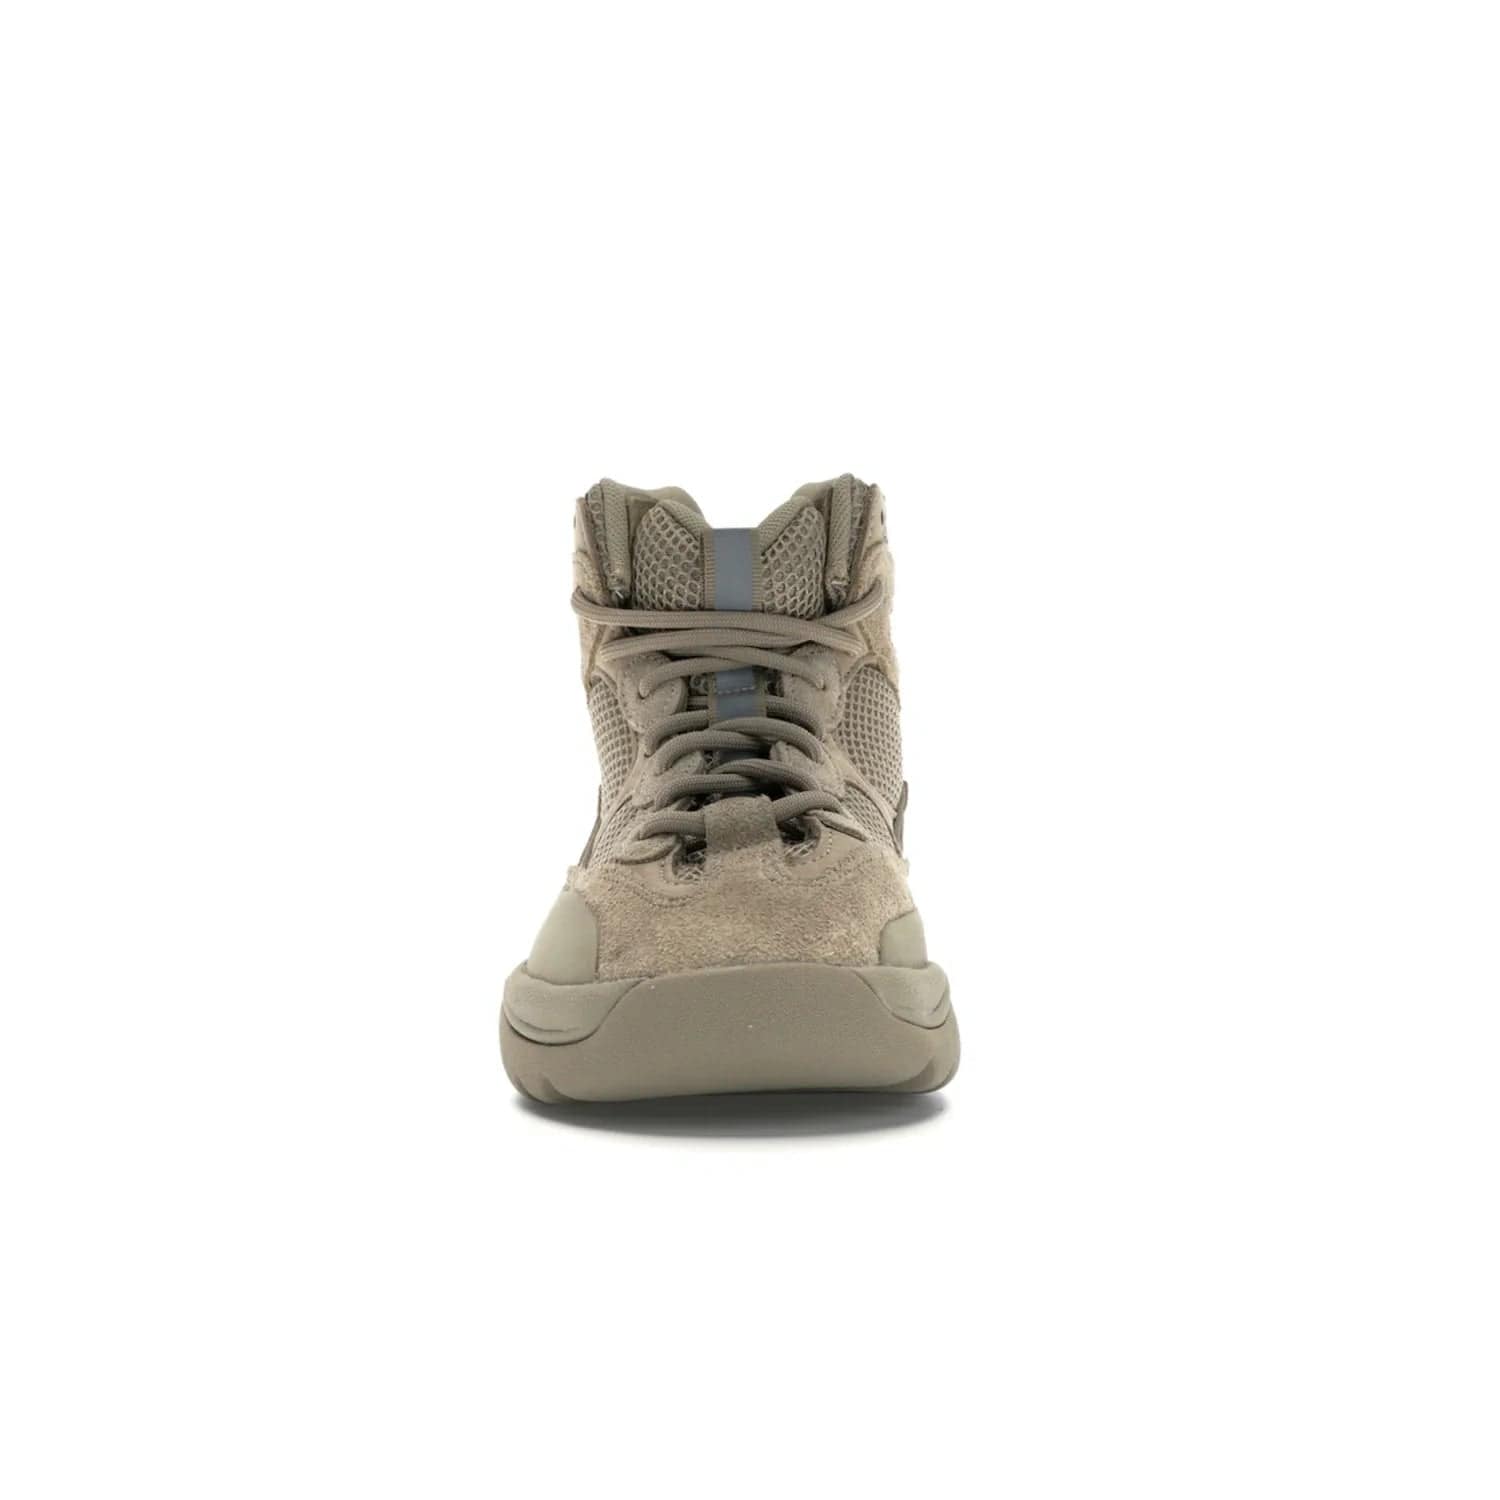 adidas Yeezy Desert Boot Rock - Image 10 - Only at www.BallersClubKickz.com - #
This season, make a fashion statement with the adidas Yeezy Desert Boot Rock. Nubuck and suede upper offers tonal style while the grooved sole provides traction and stability. Get yours in April 2019.